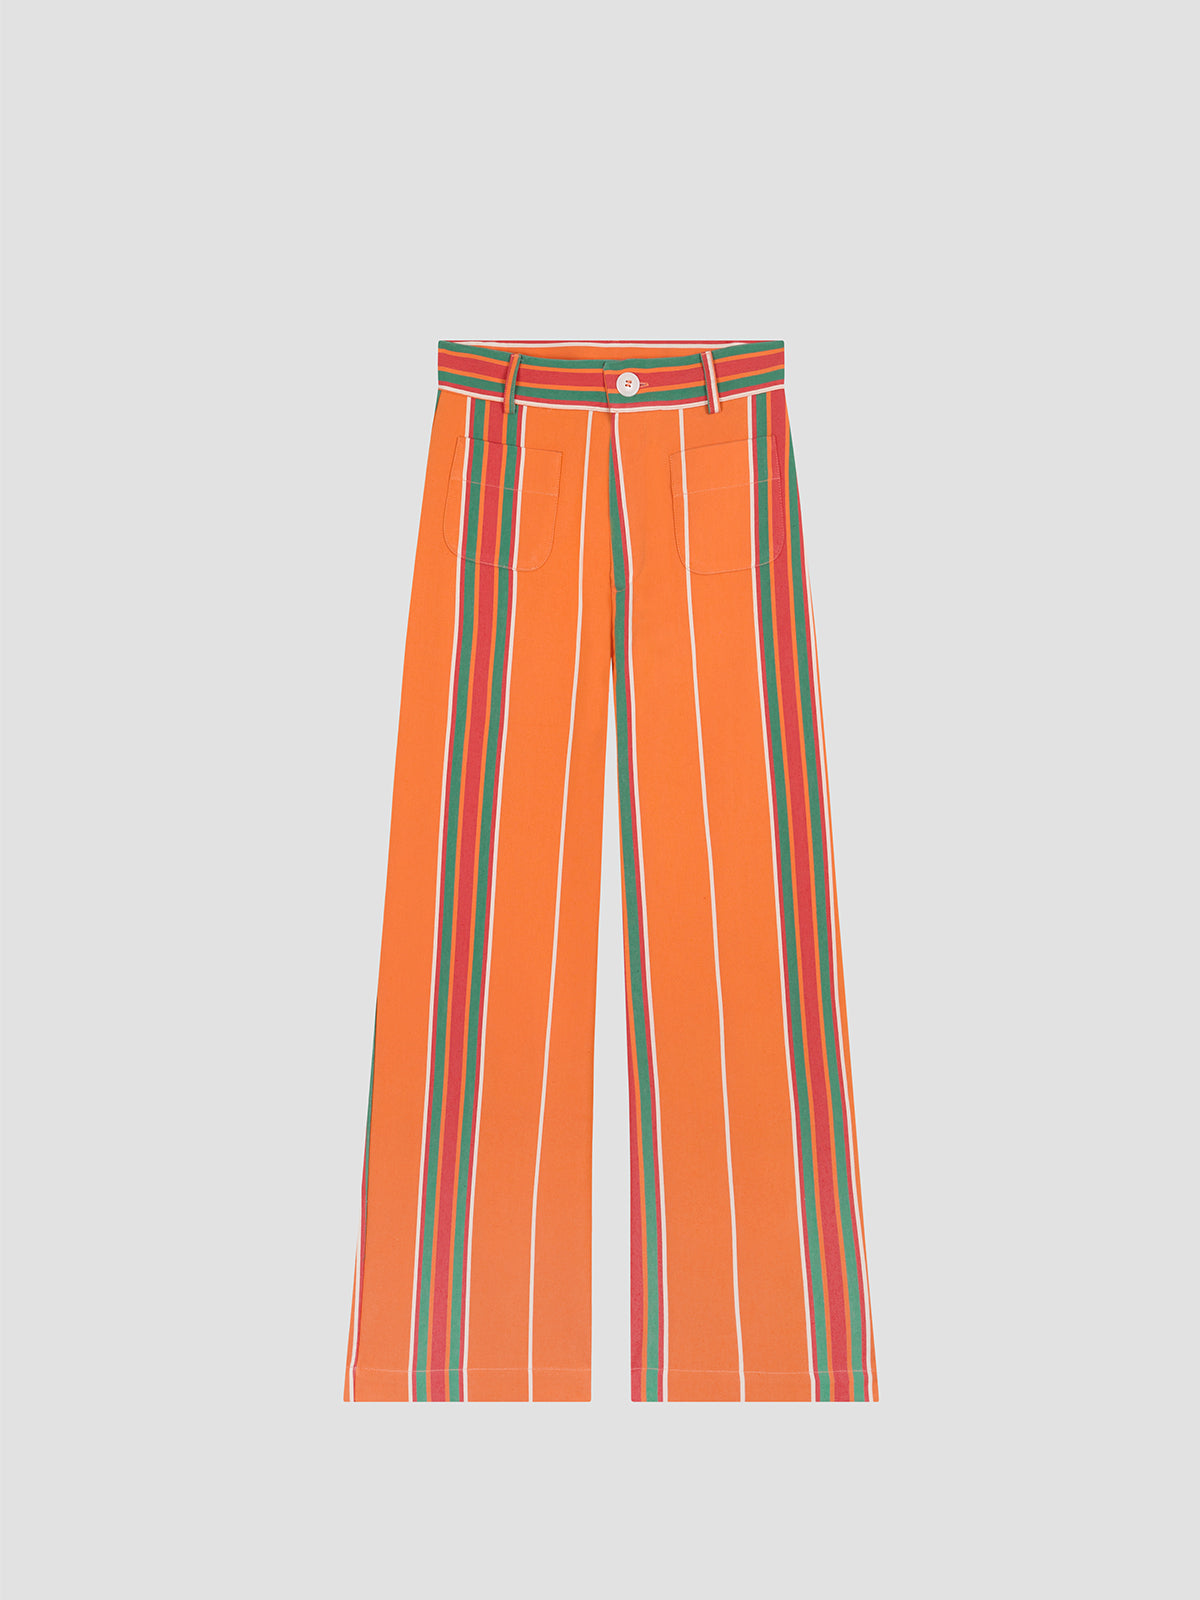 Orange high-waisted printed trousers in cotton with red and green stripes. 